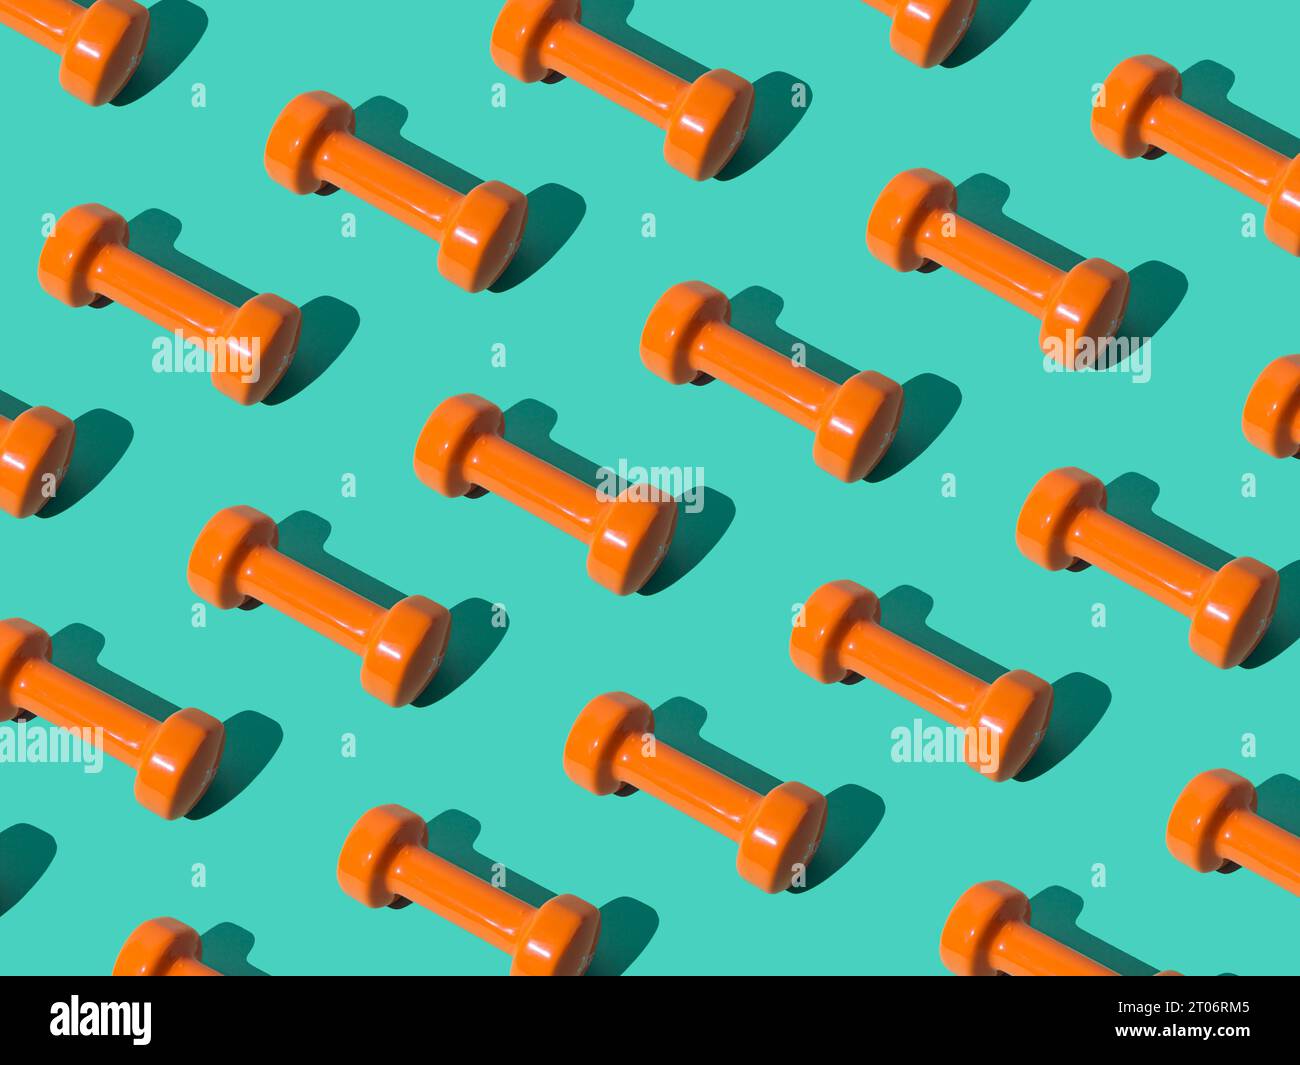 Creative pattern composition made of orange dumbbells on pastel green background. Minimal fitness, healthy lifestyle and sport concept. Stock Photo